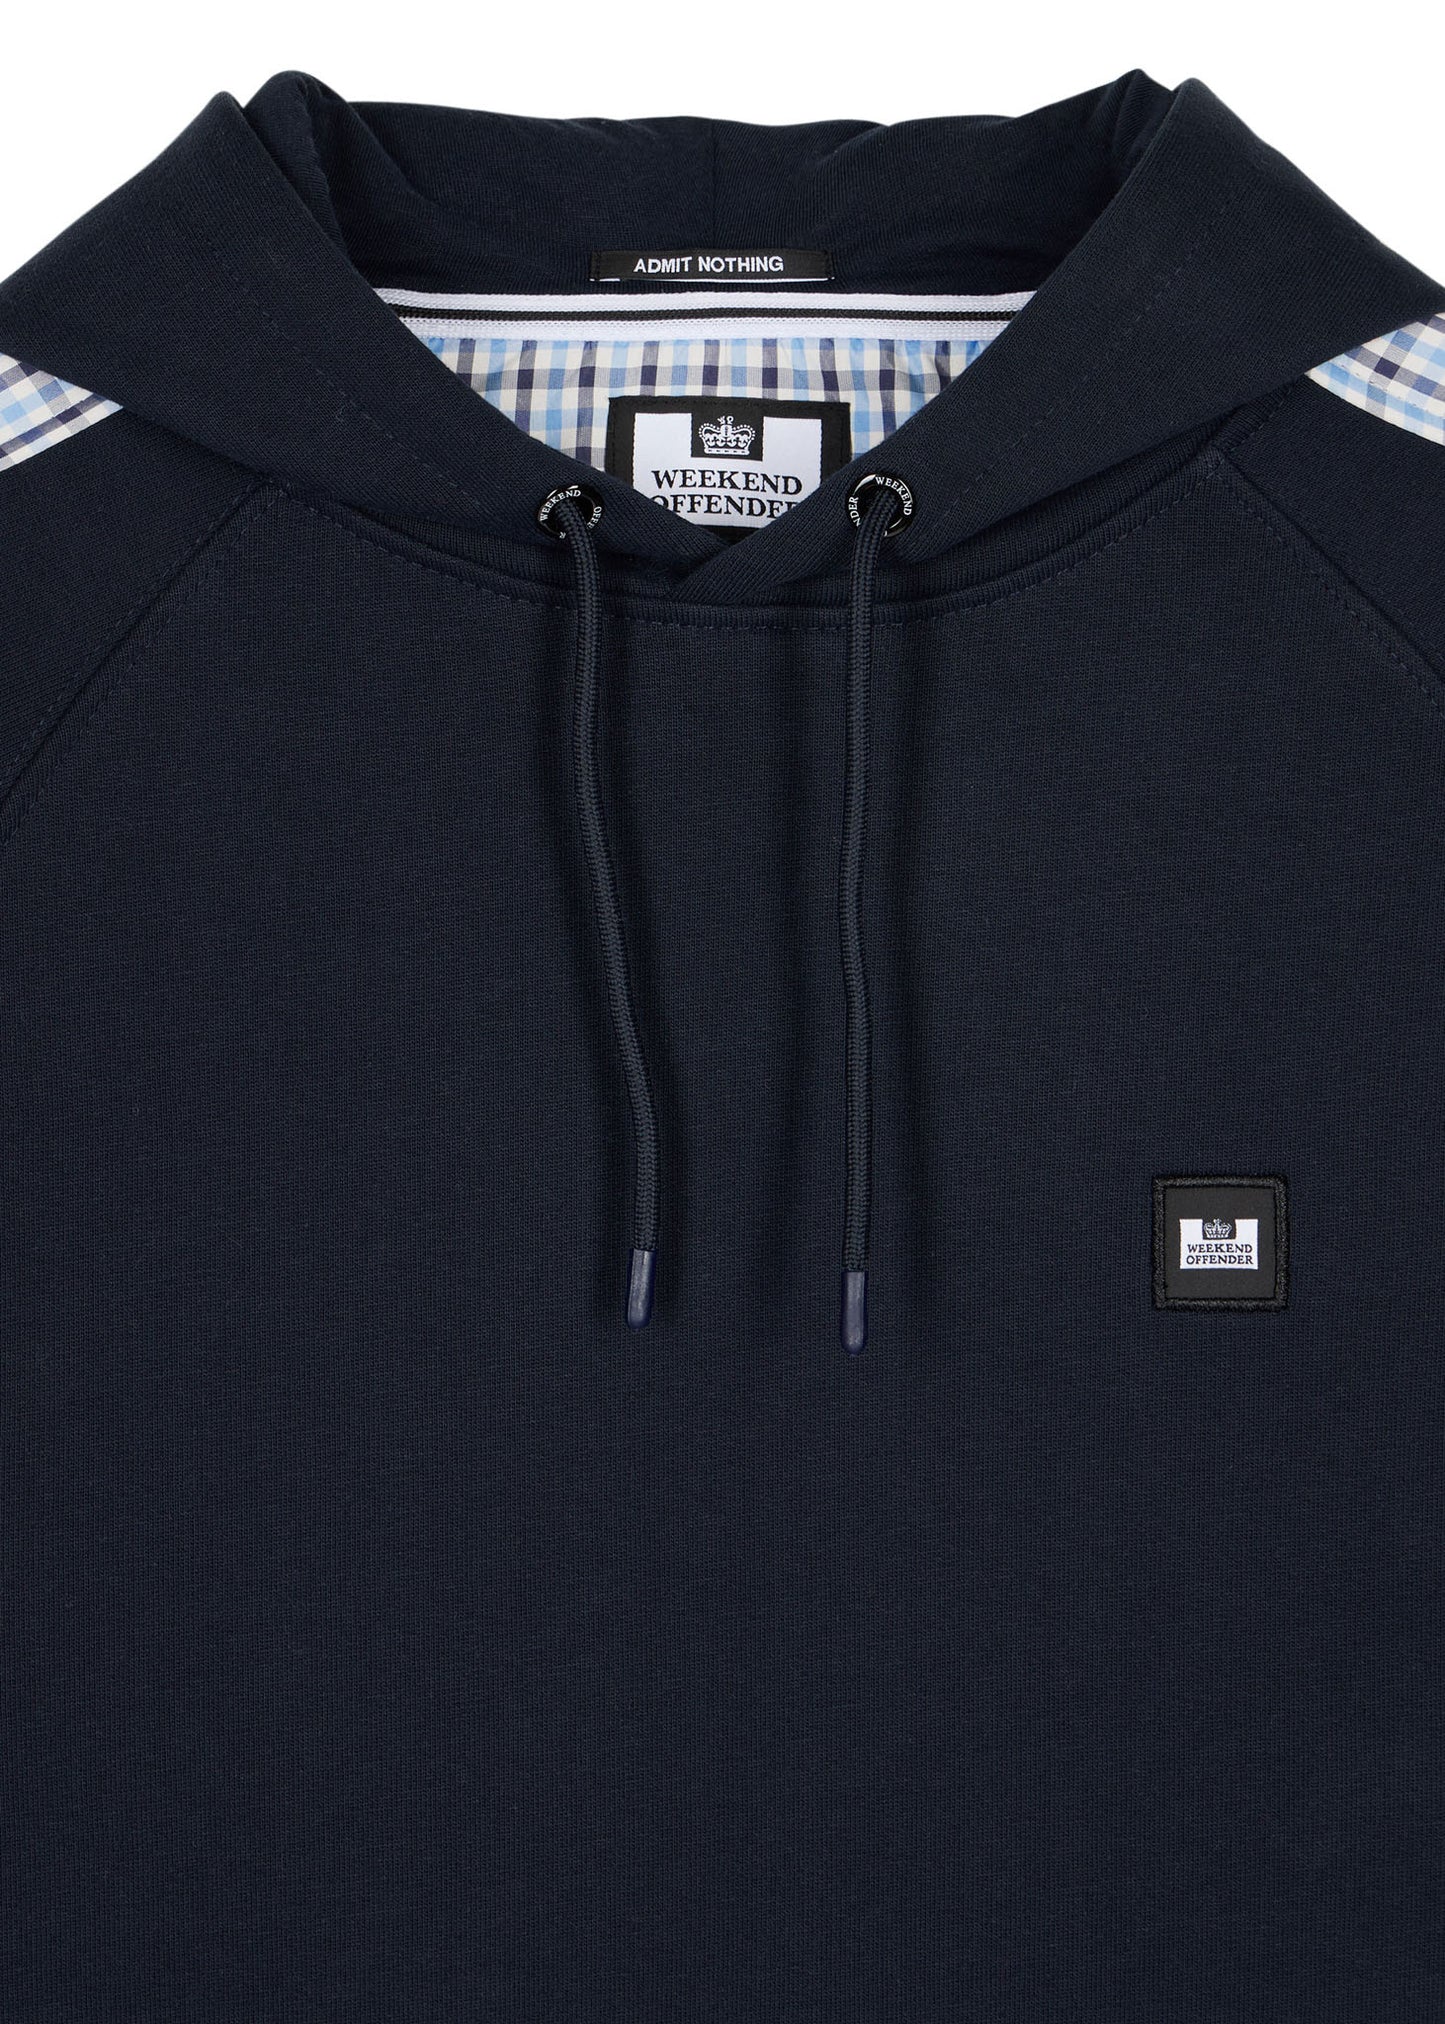 Weekend Offender Hoodies  Lo sung - navy blue house check 